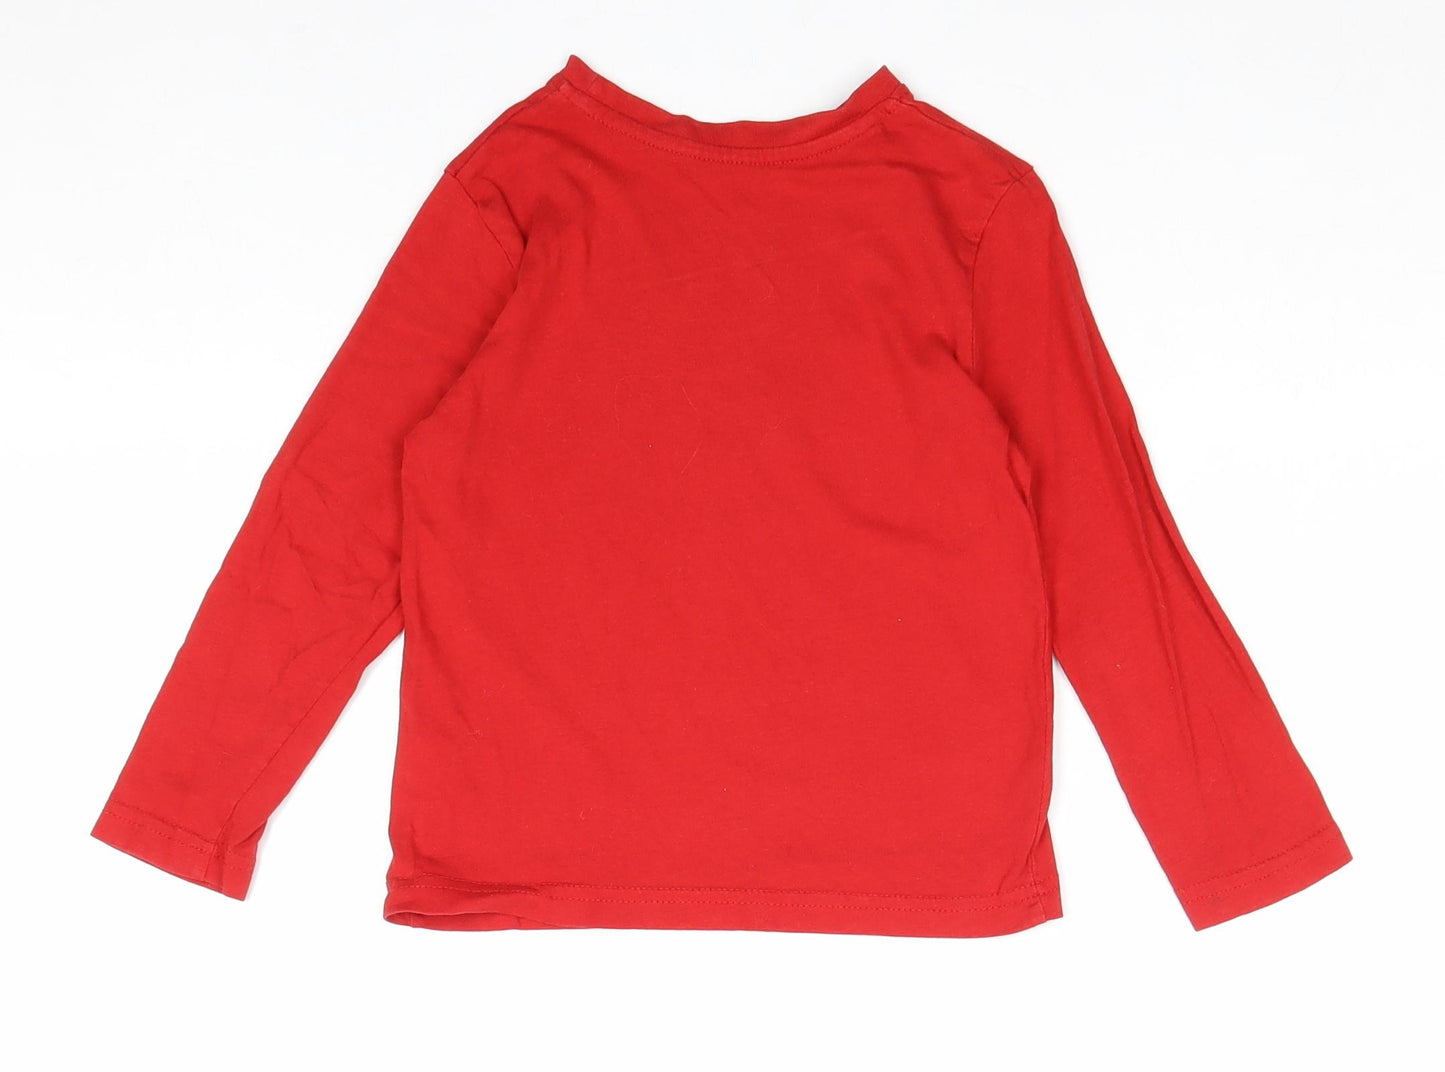 Primark Boys Red 100% Cotton Pullover T-Shirt Size 3-4 Years Round Neck Pullover - Super Hero